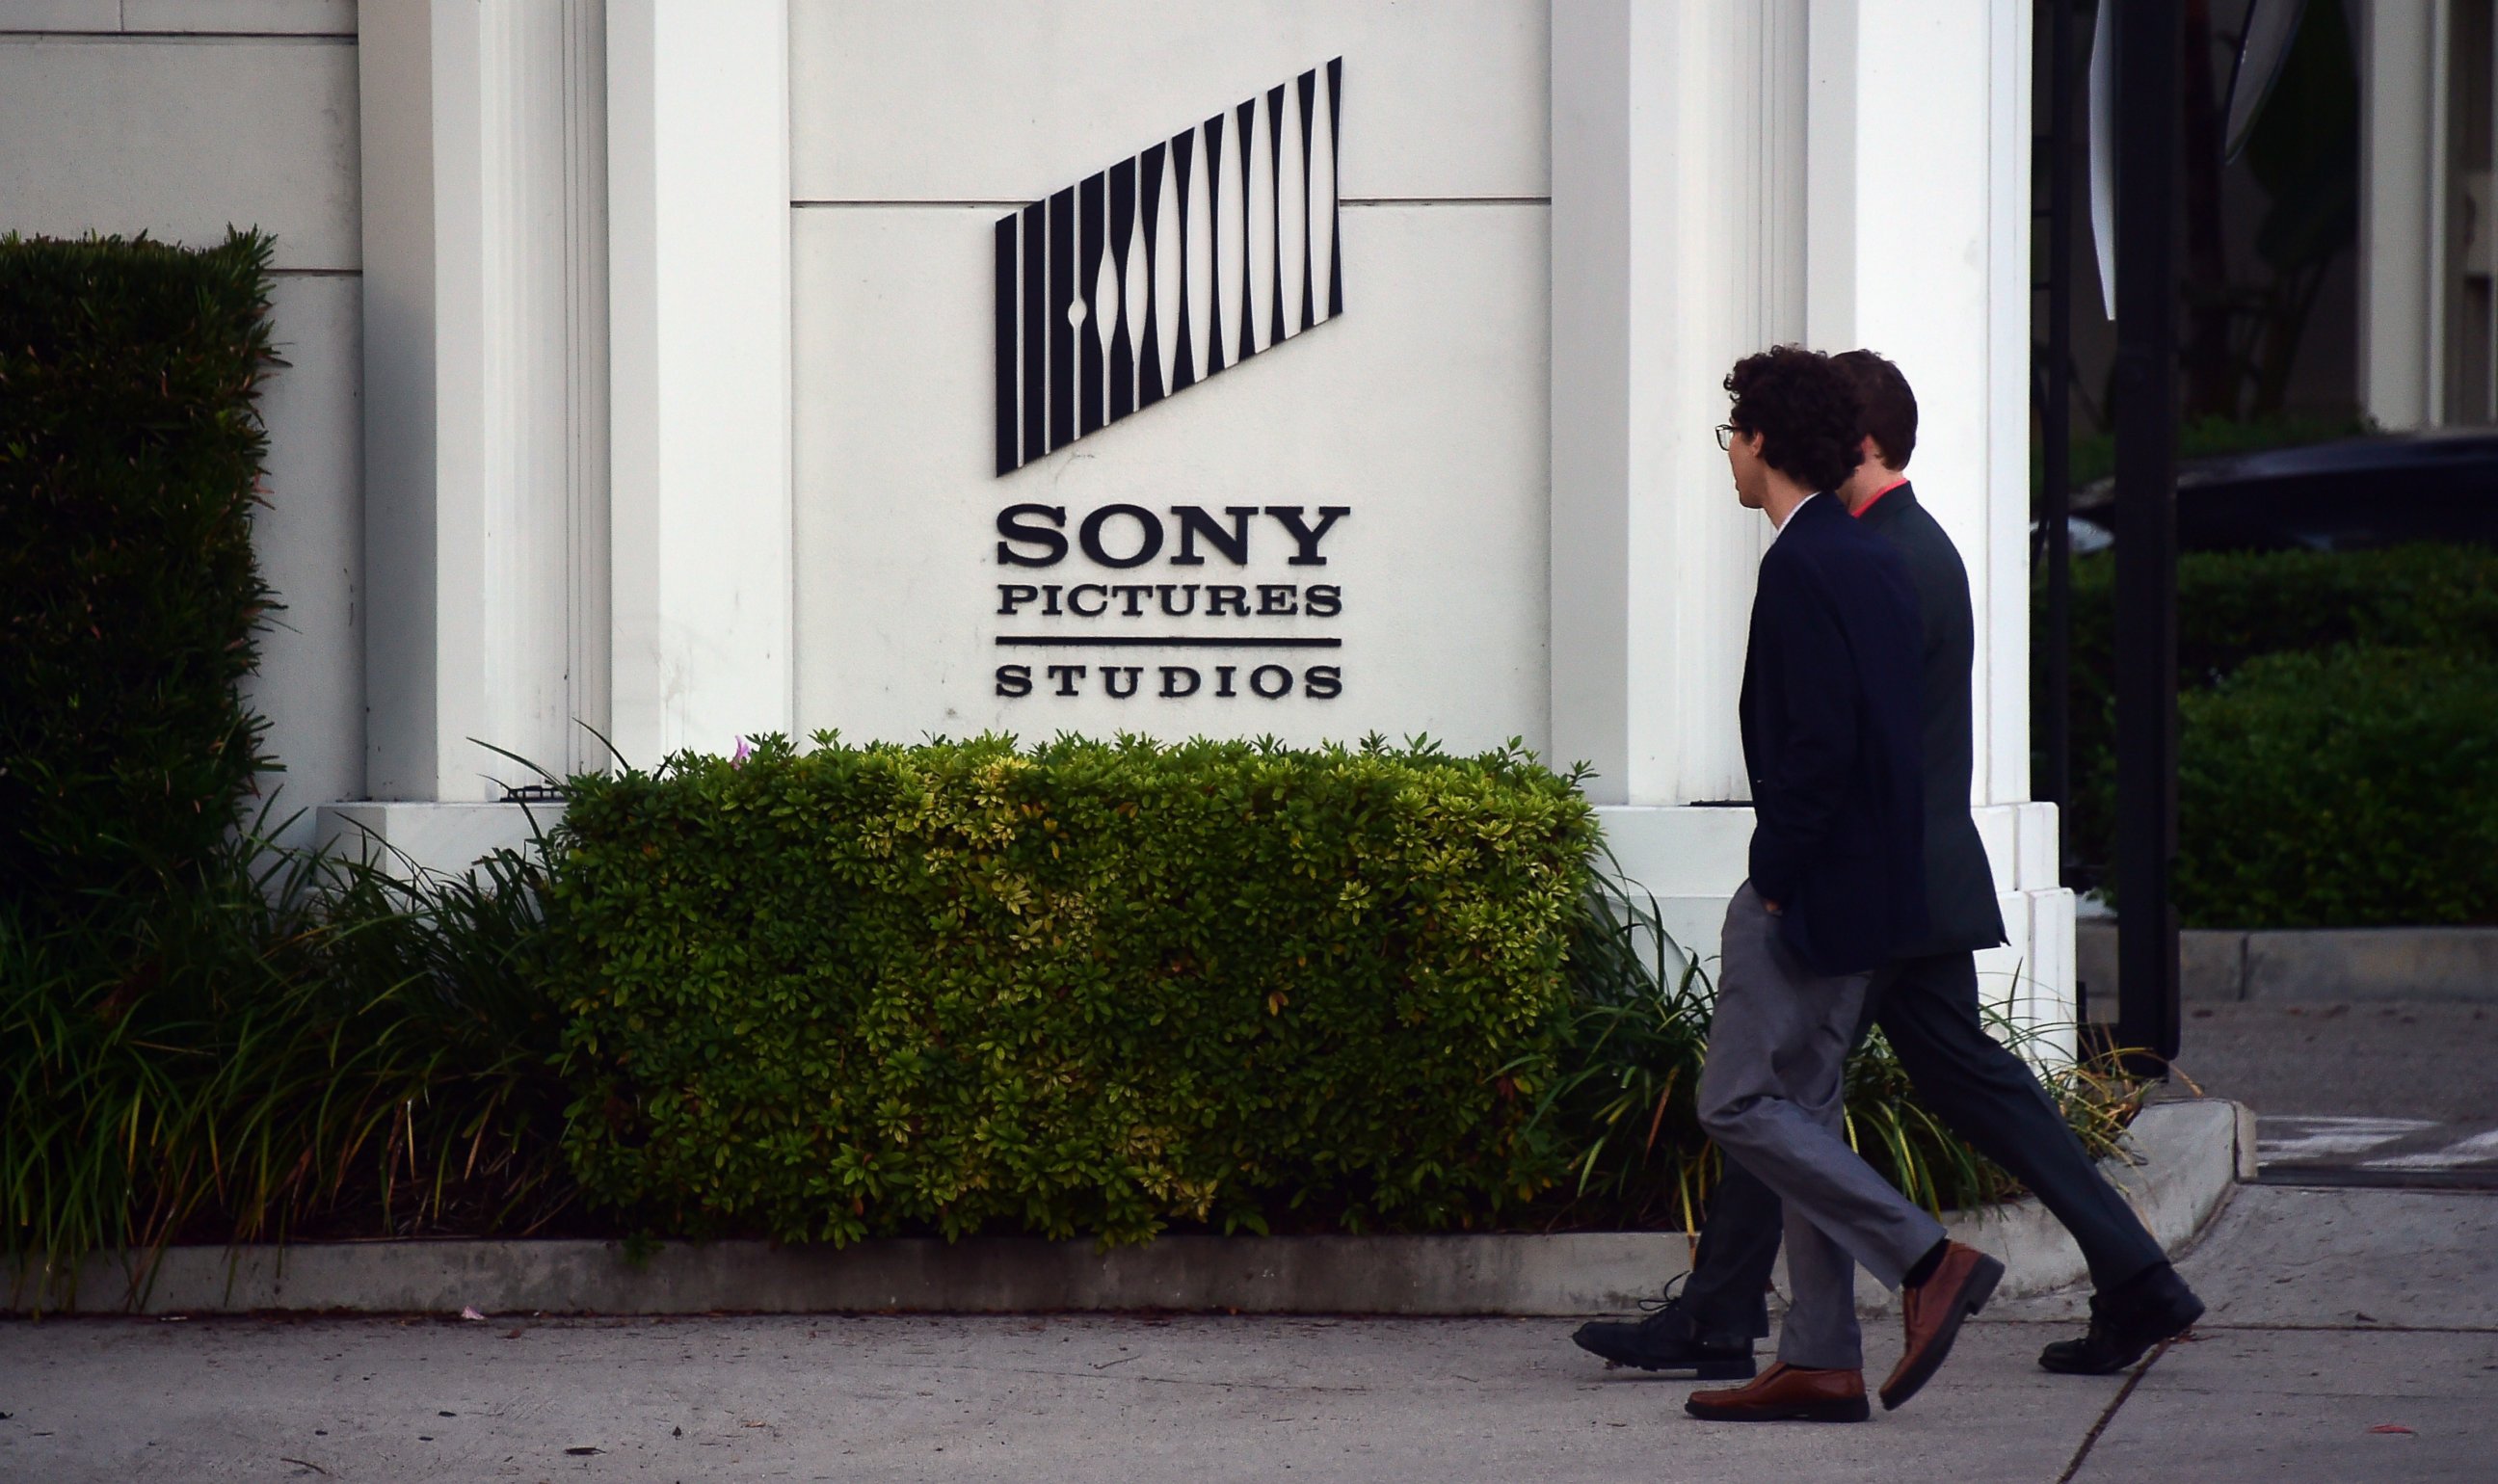 PHOTO: Pedestrians walk past an exterior wall to Sony Pictures Studios in Los Angeles, Calif. on Dec. 4, 2014.